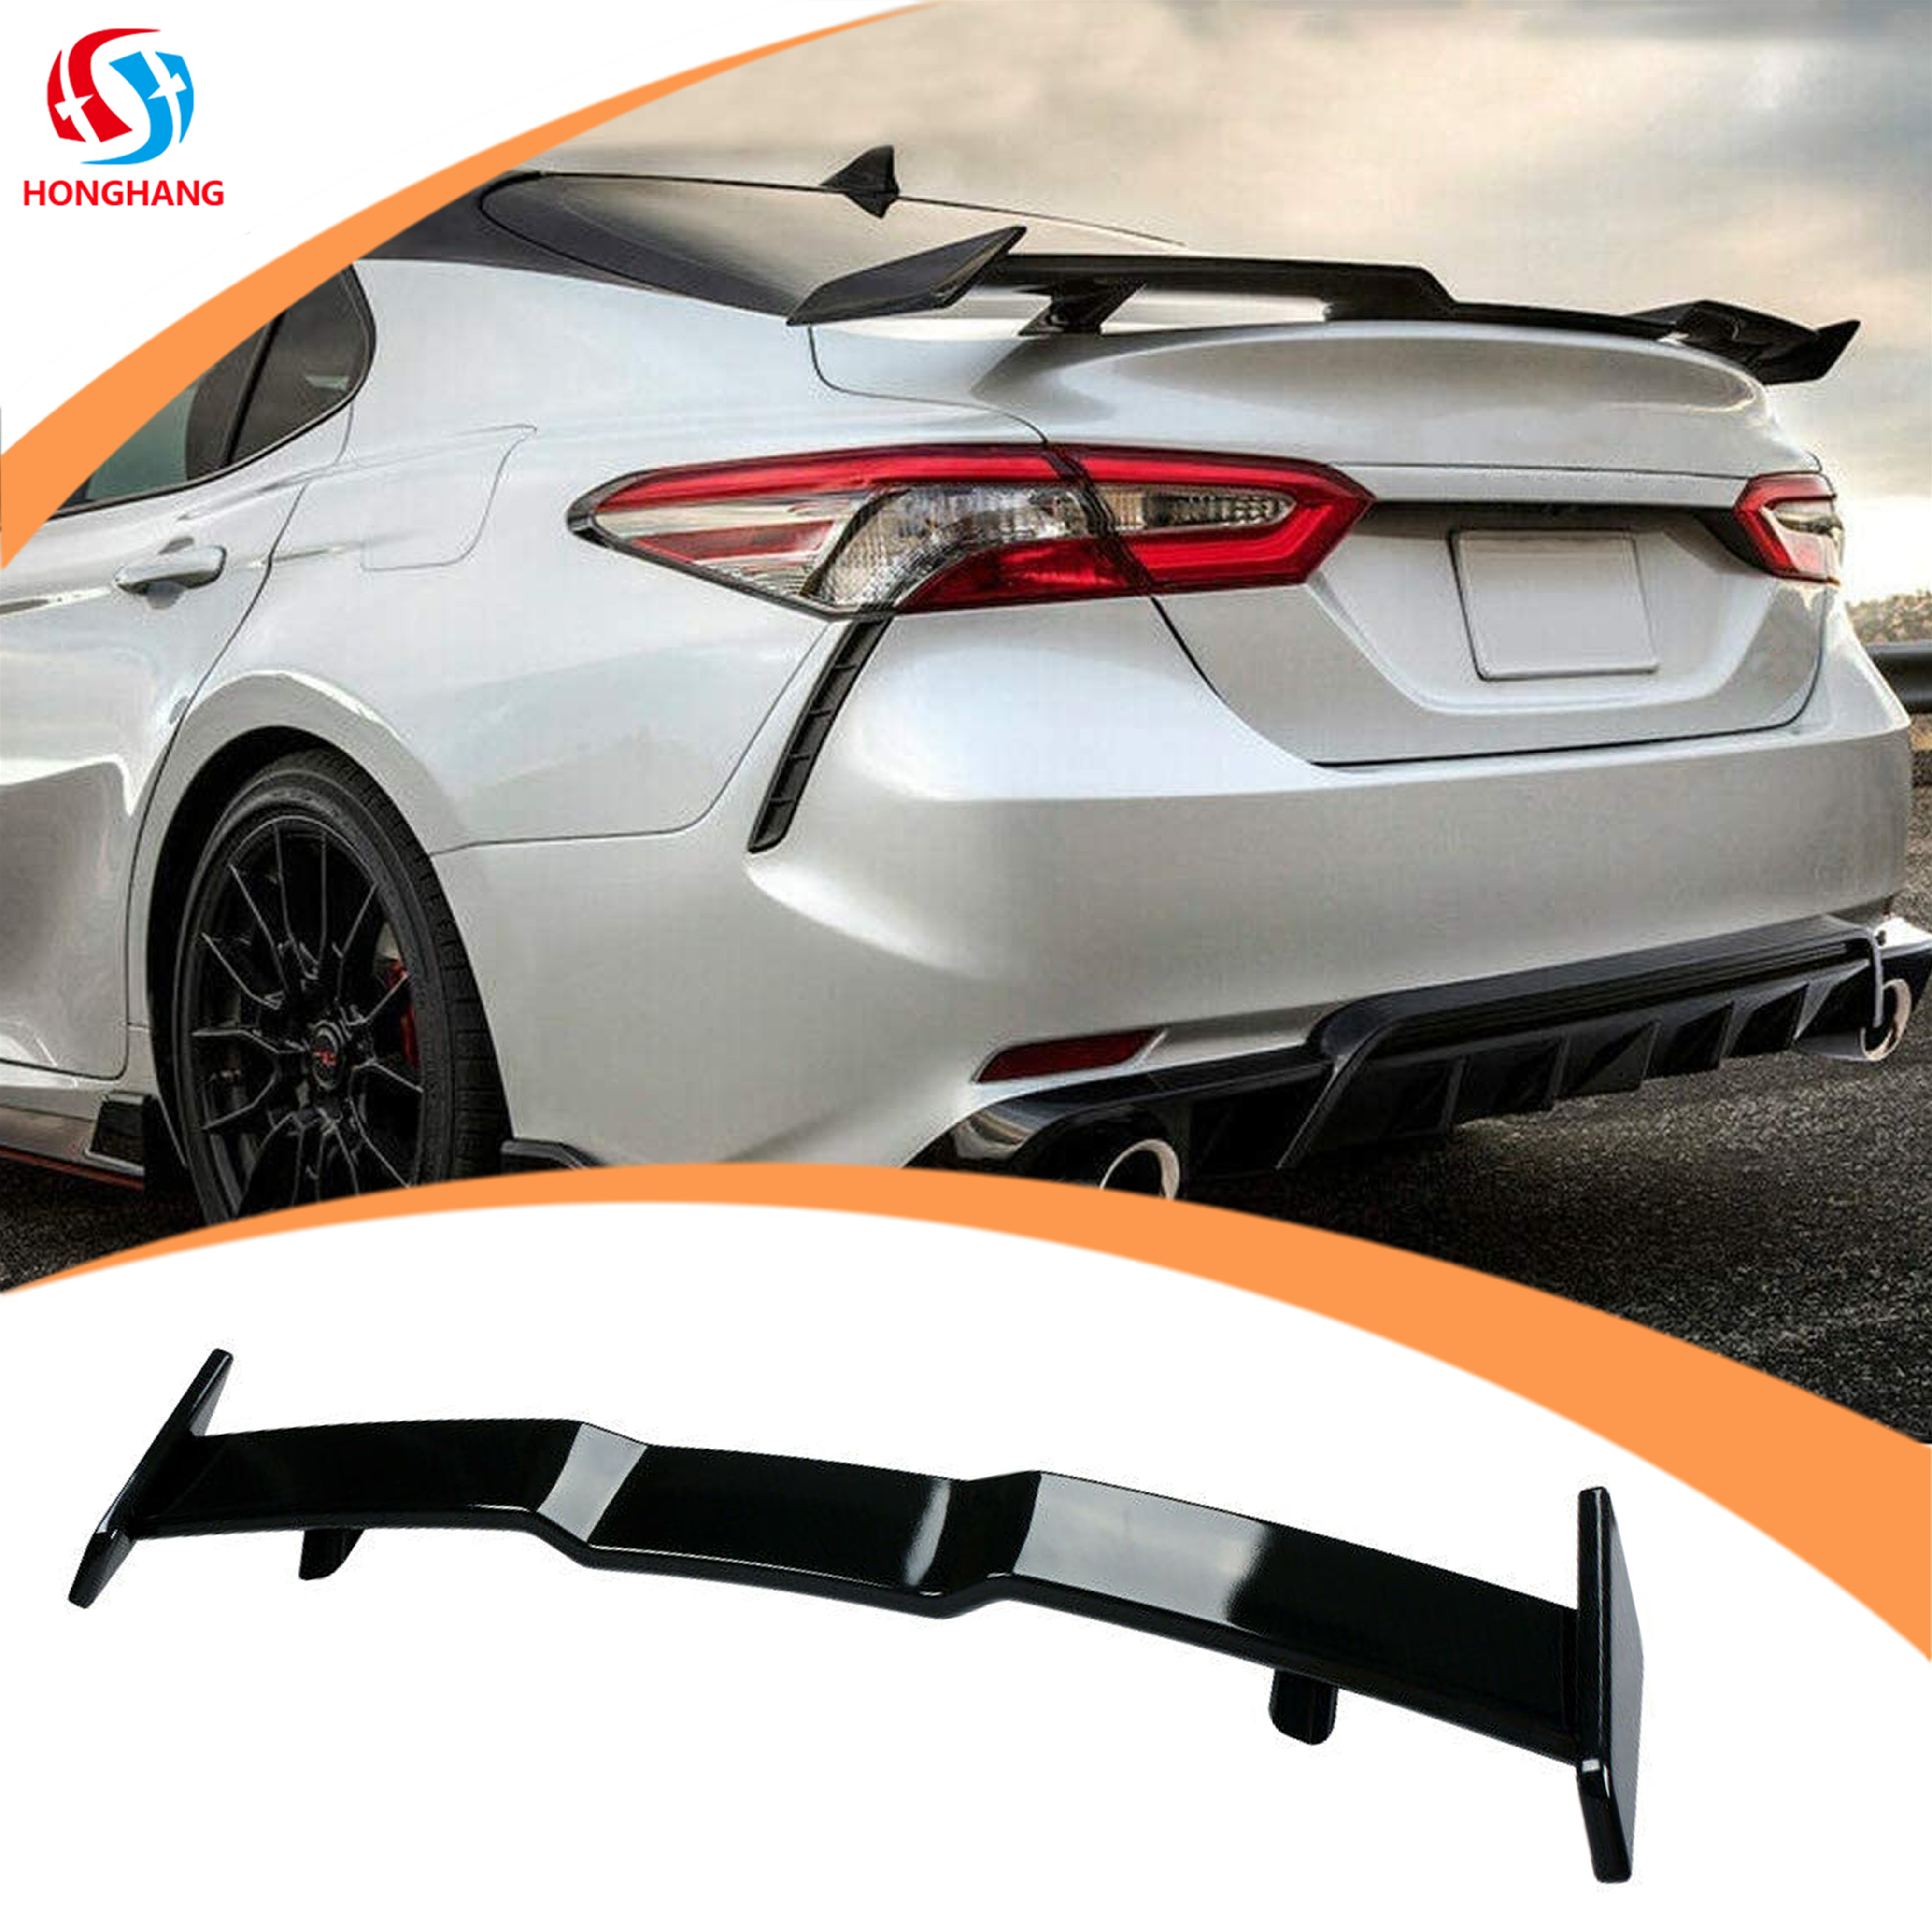 TRD Style Rear Spoiler for Toyota Camry 2018-2020 